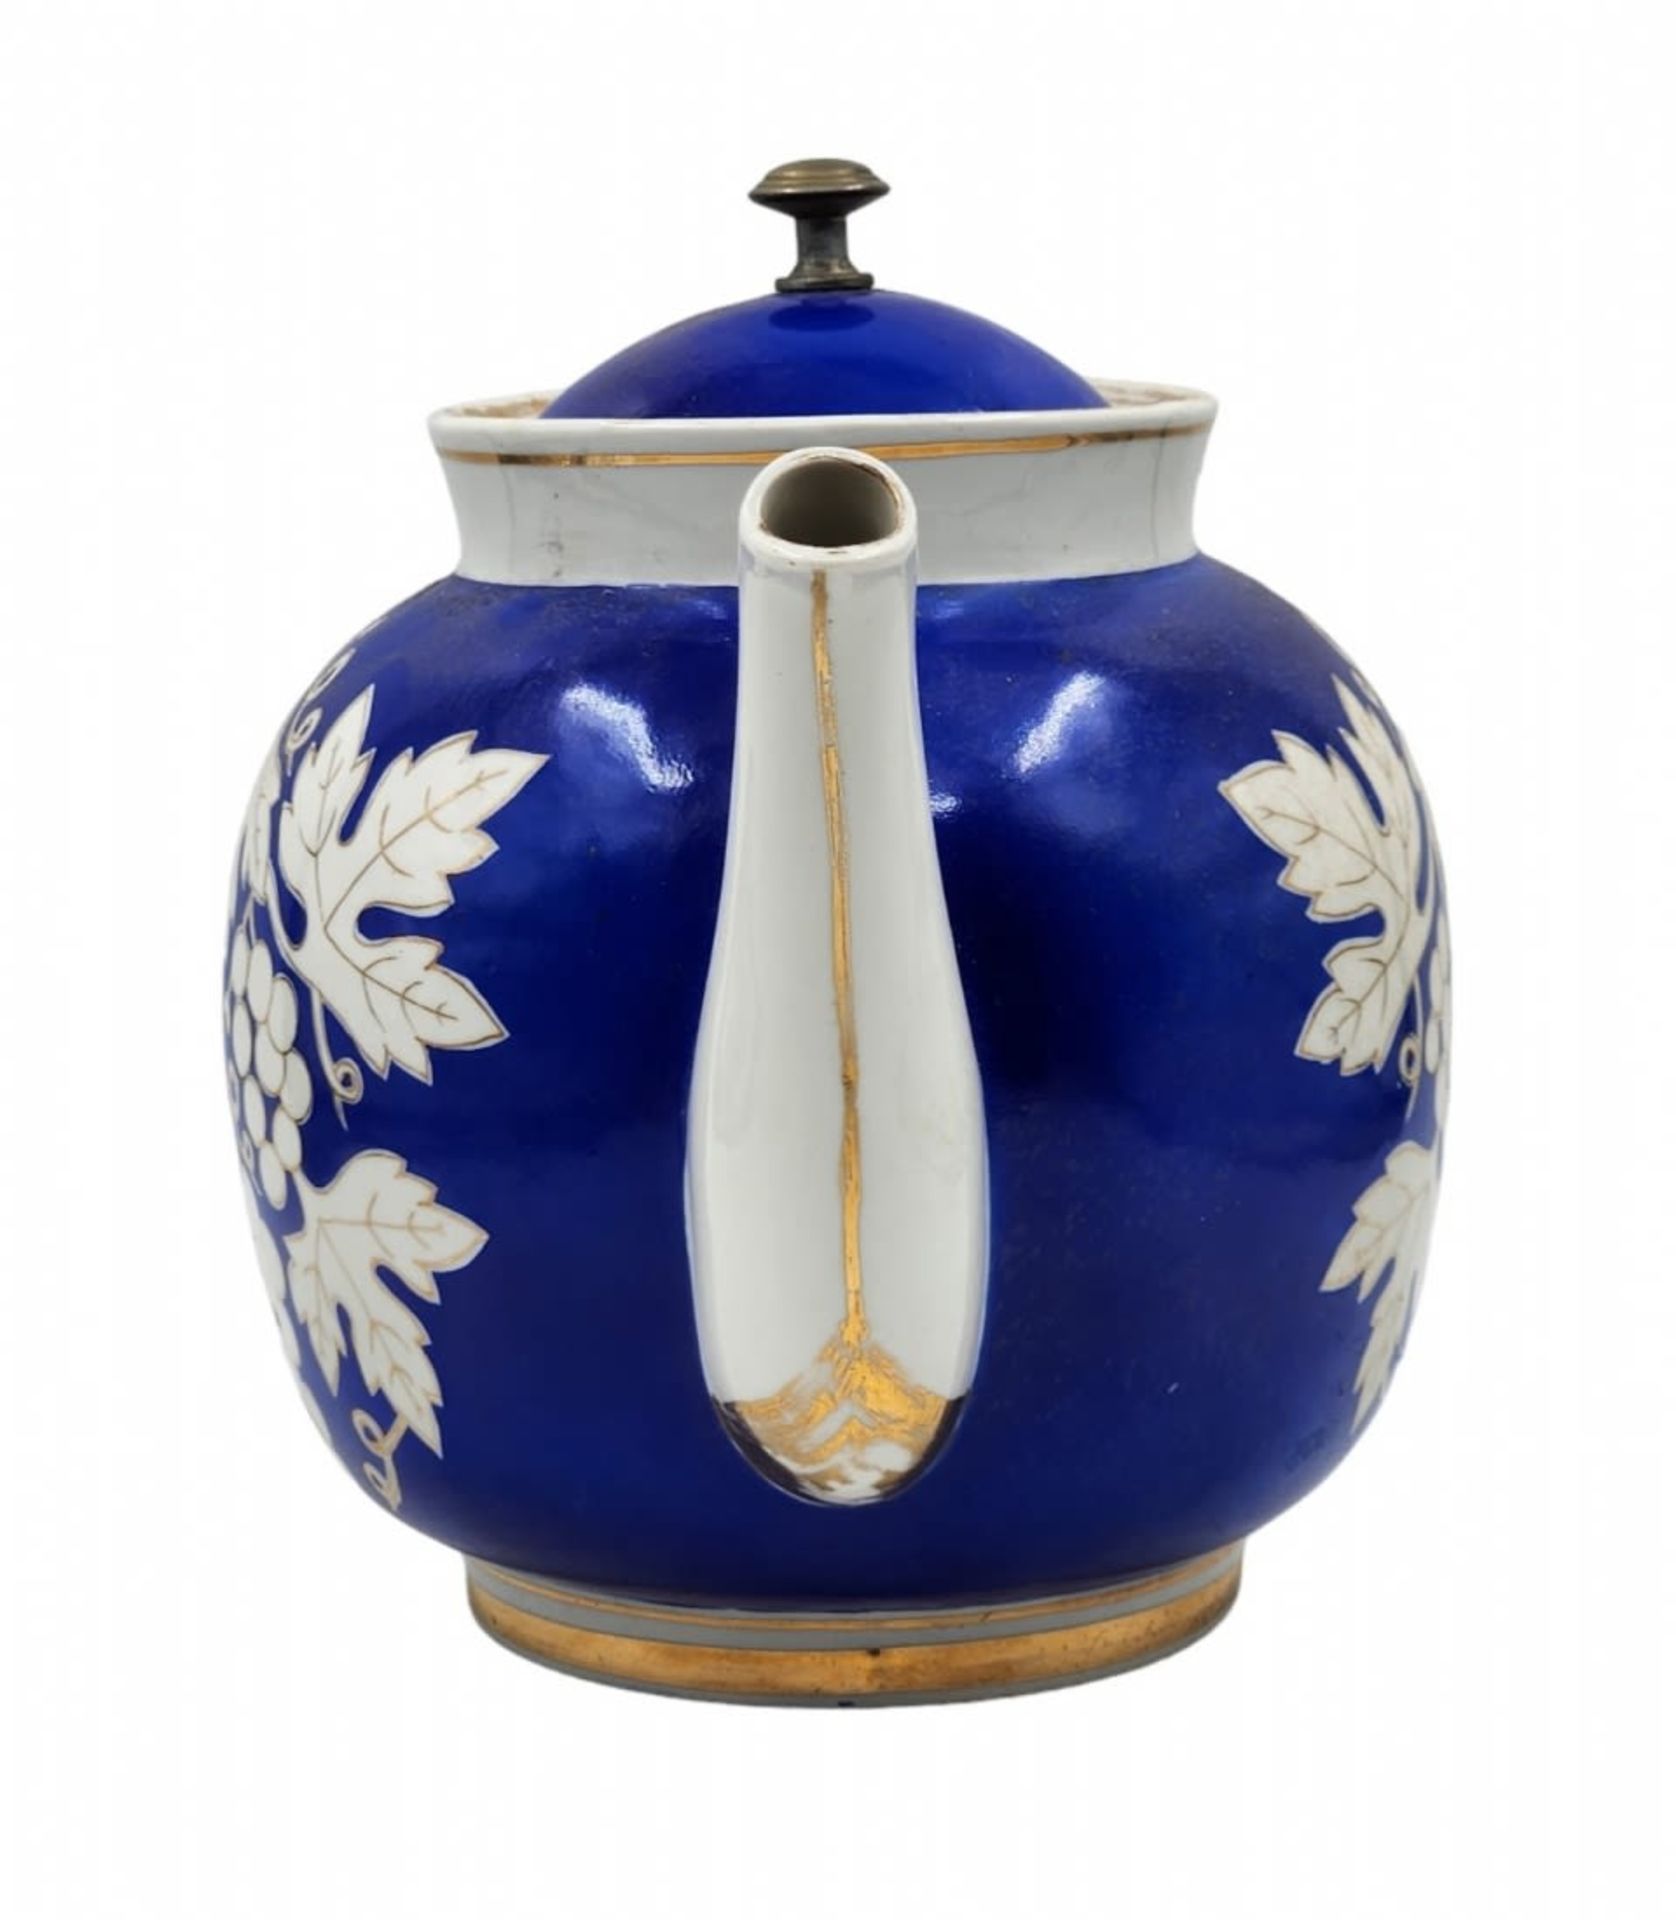 A large Russian (Soviet) teapot, made of decorated porcelain and matching lid, signed. Height: 28 - Image 3 of 4